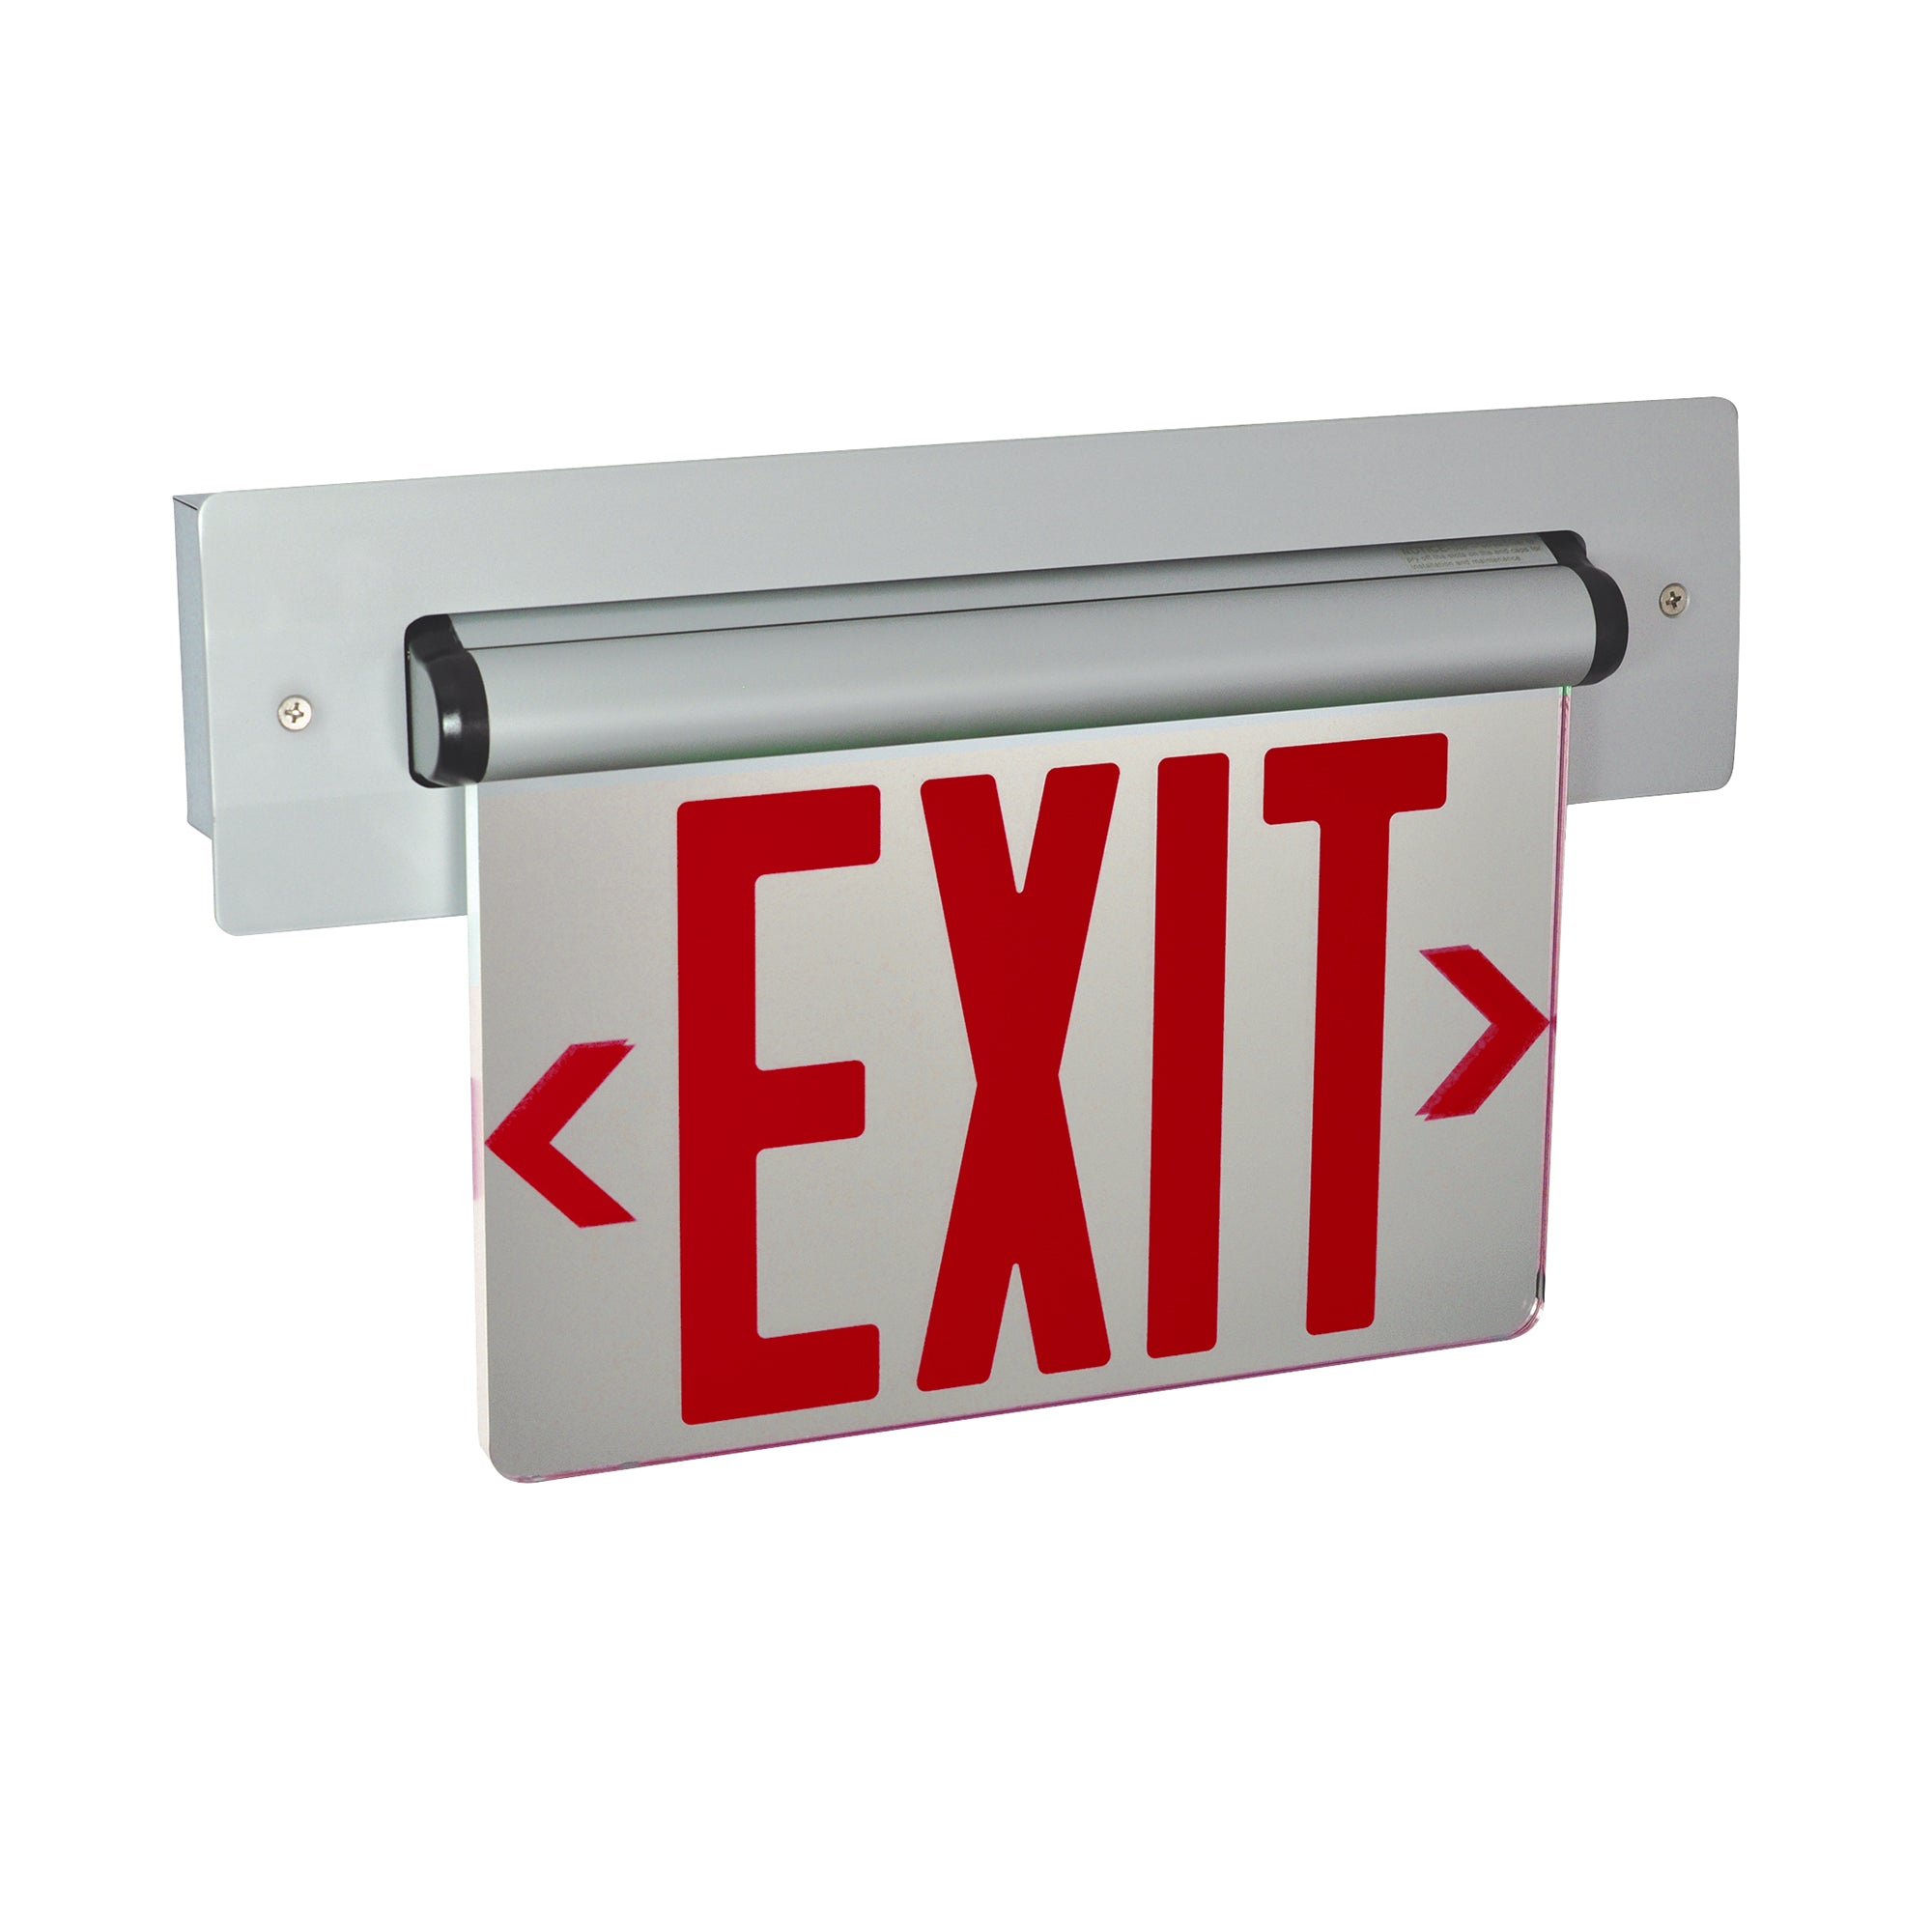 Nora Lighting NX-813-LEDR2MW - Exit / Emergency - Recessed Adjustable LED Edge-Lit Exit Sign, AC Only, 6 Inch Red Letters, Double Face / Mirrored Acrylic, White Housing